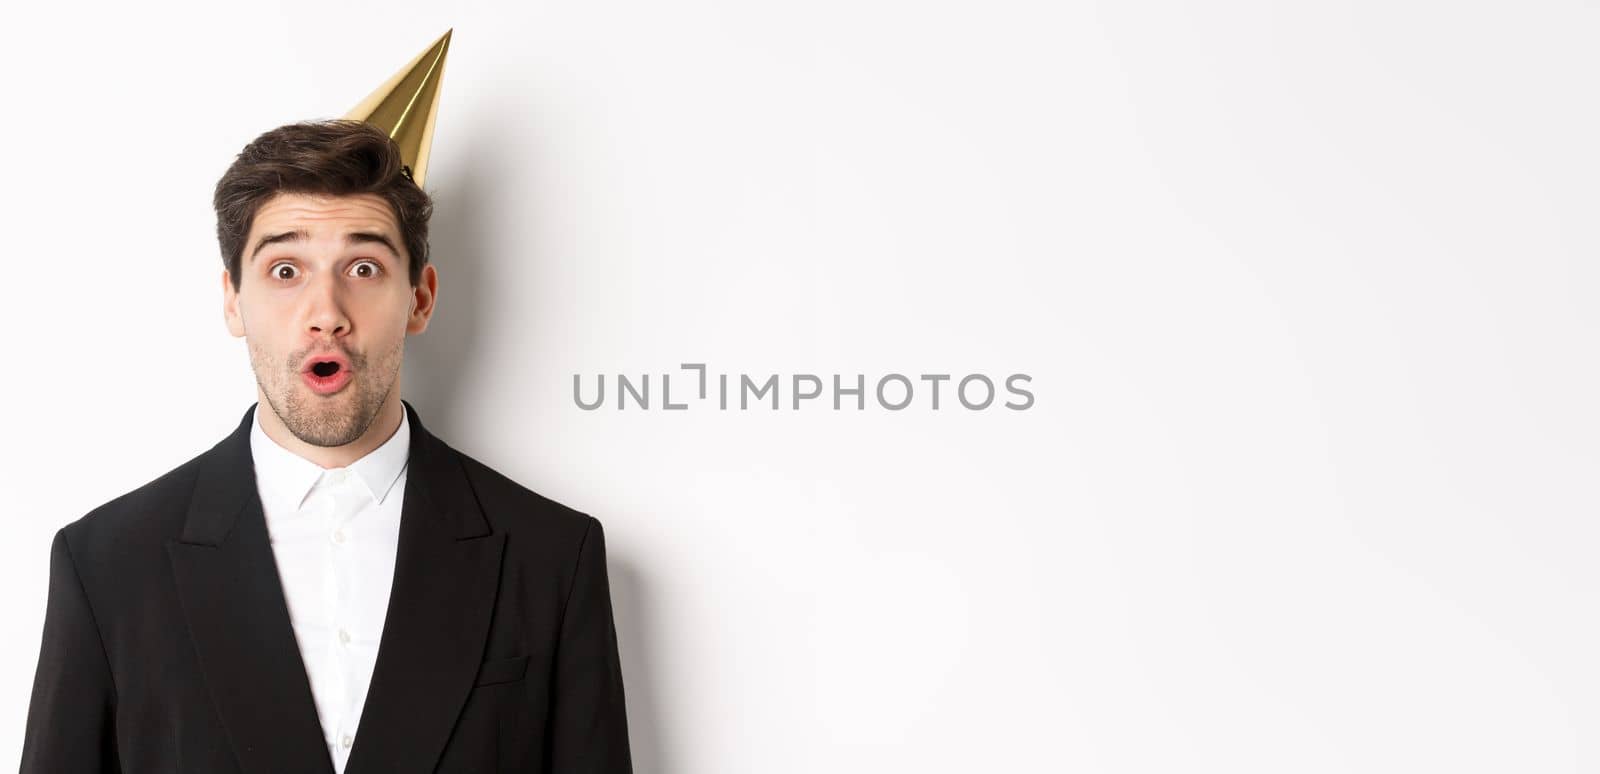 Close-up of attractive man in party hat and trendy suit, looking surprised, celebrating new year, standing against white background.